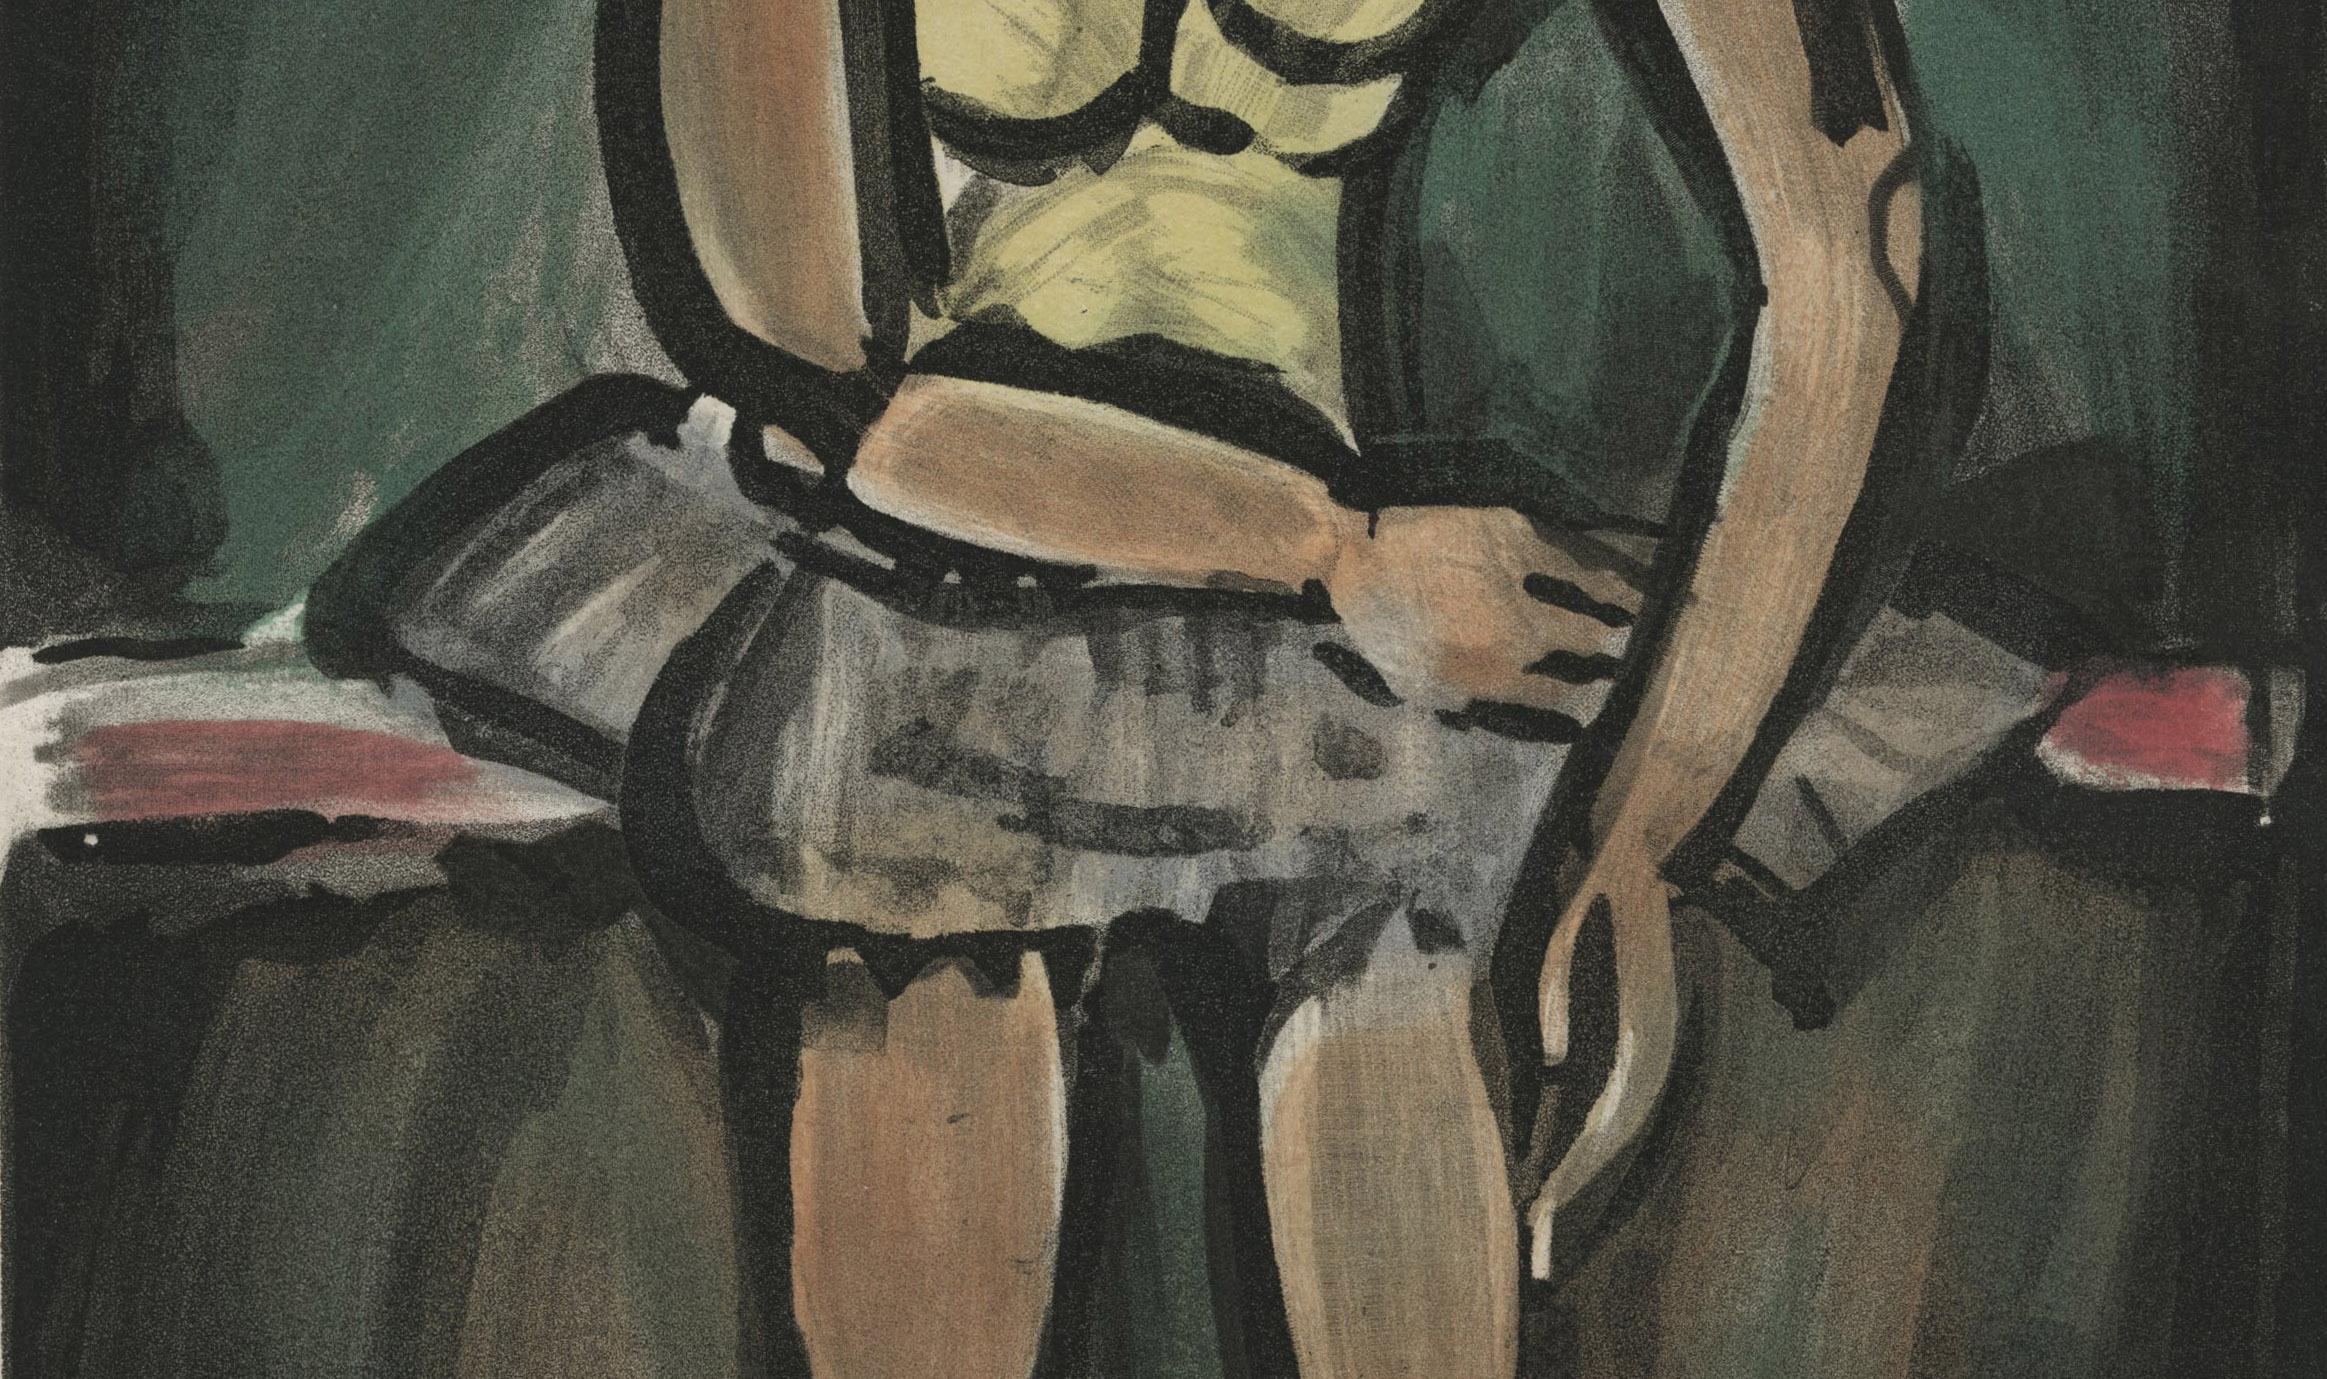 Ballerine (Ballerina) - French School Print by Georges Rouault